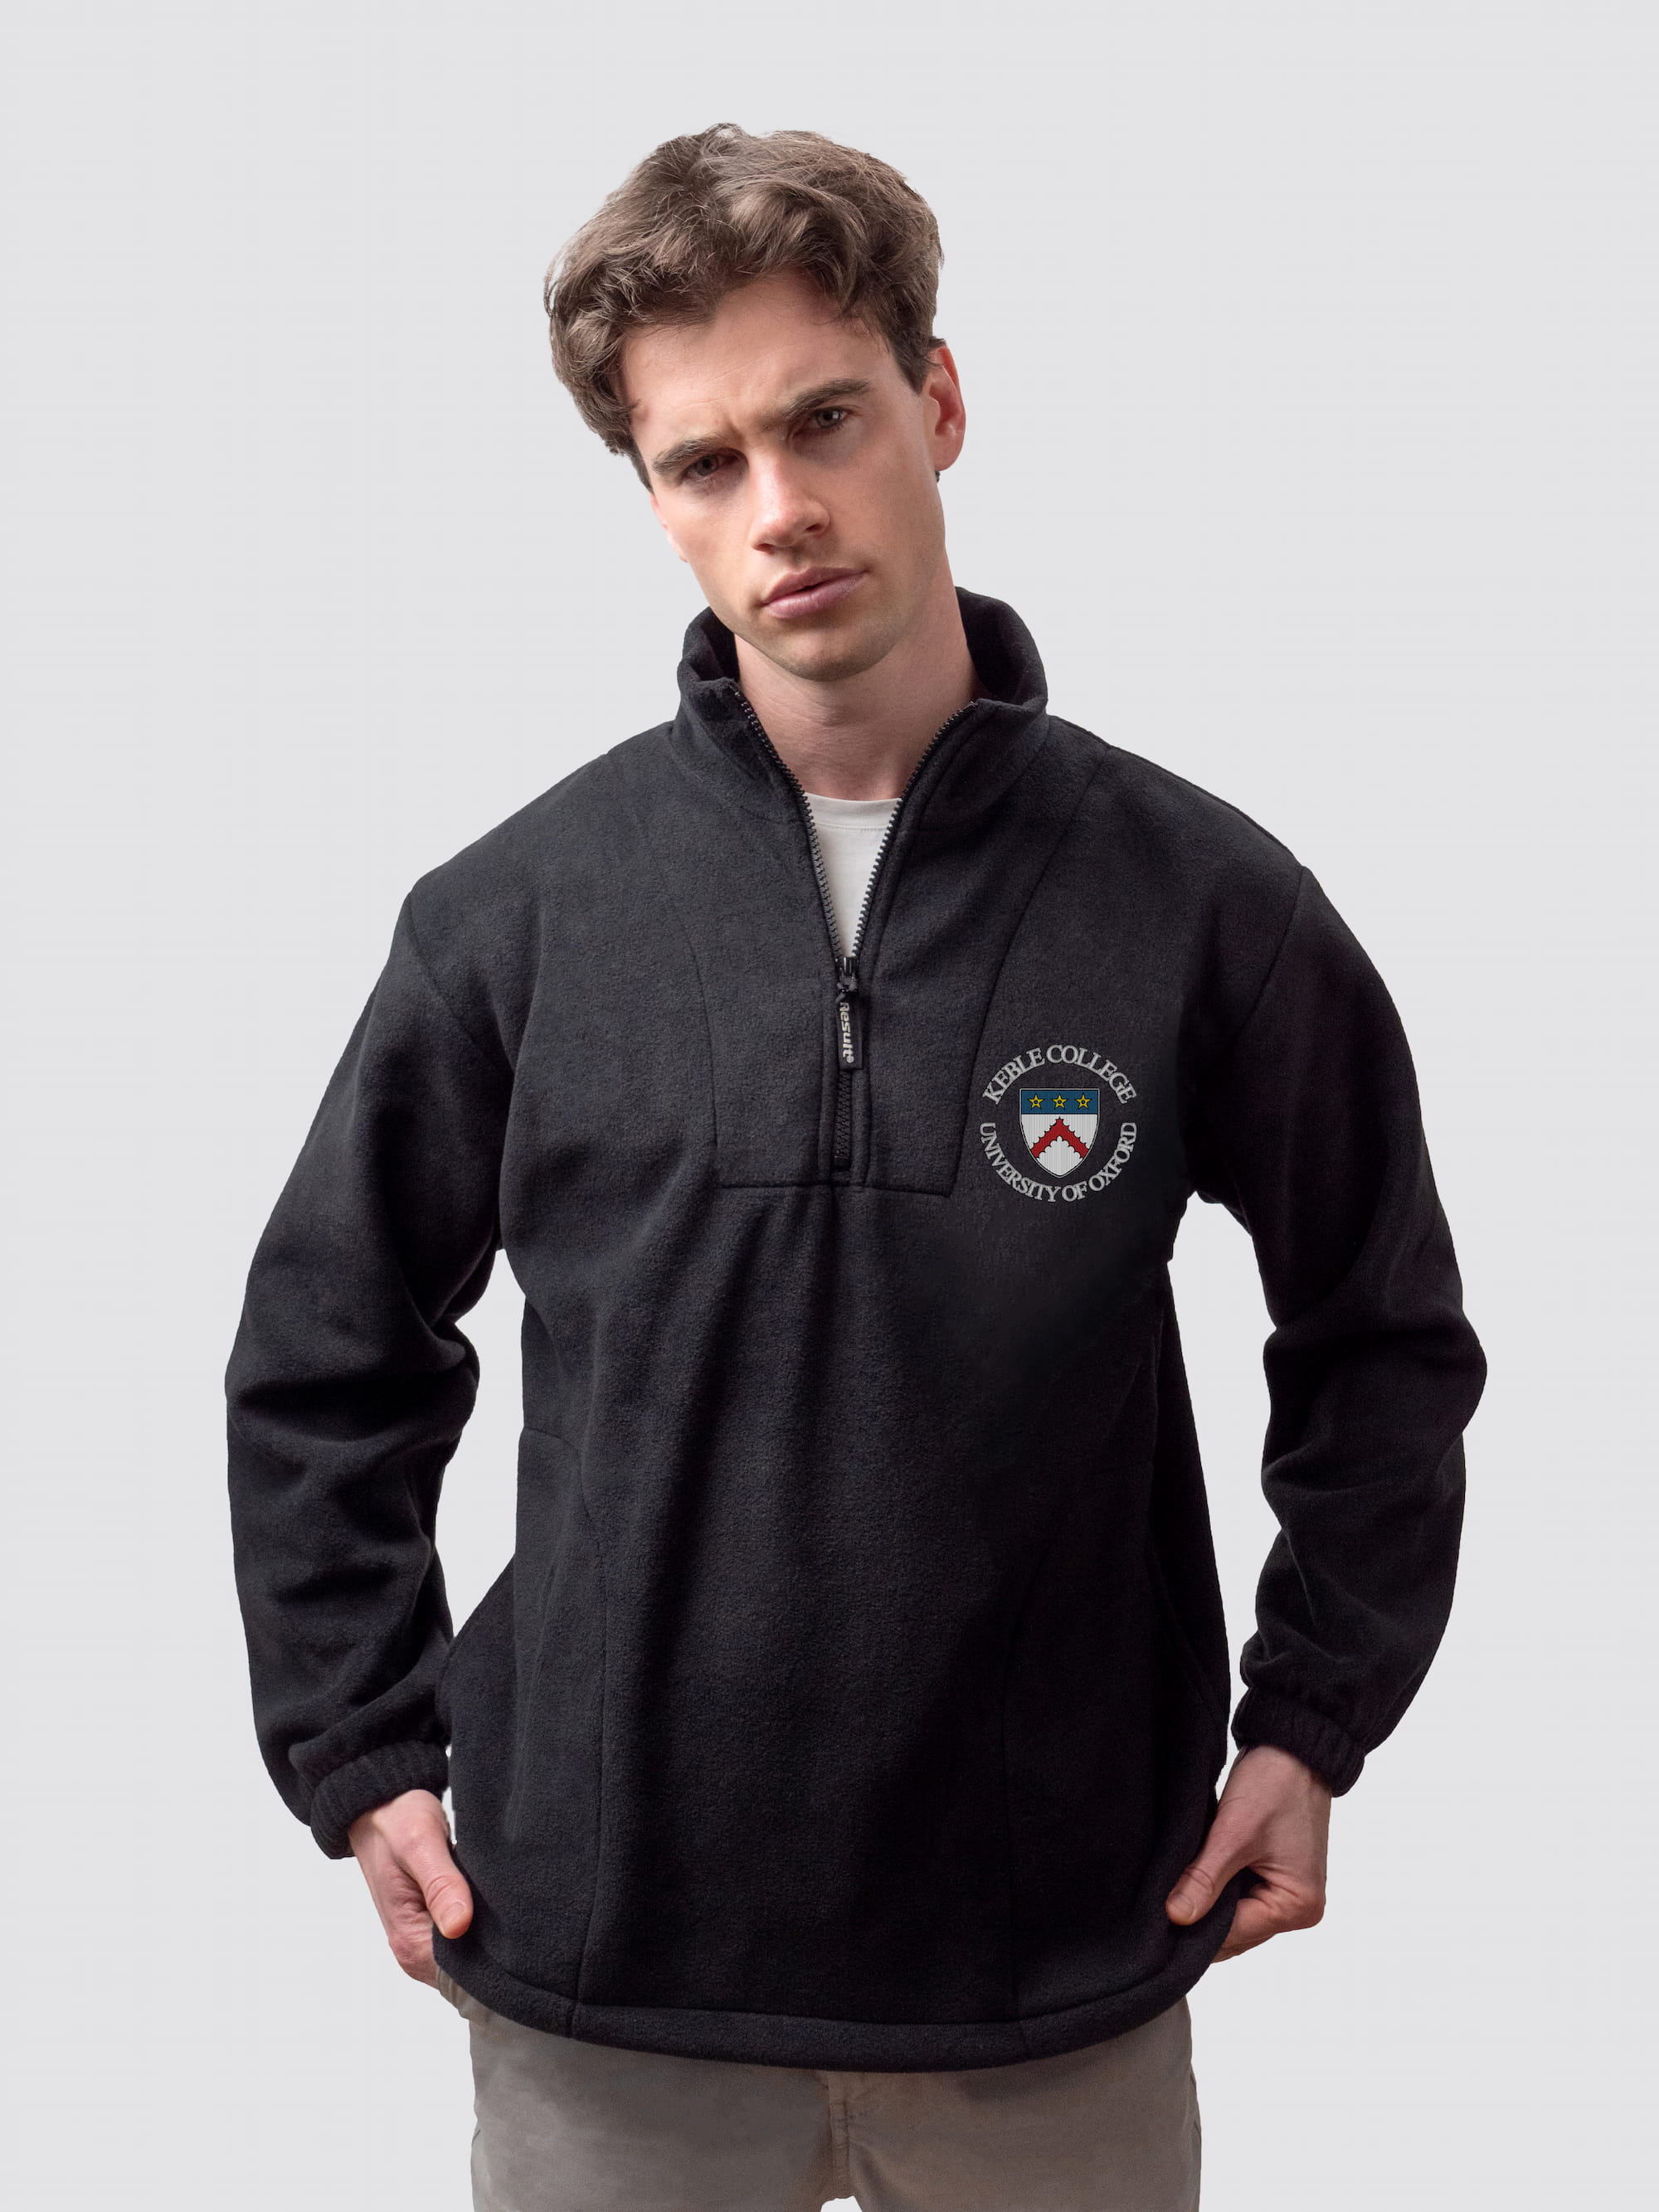 Oxford university fleece, with custom embroidered initials and Keble crest